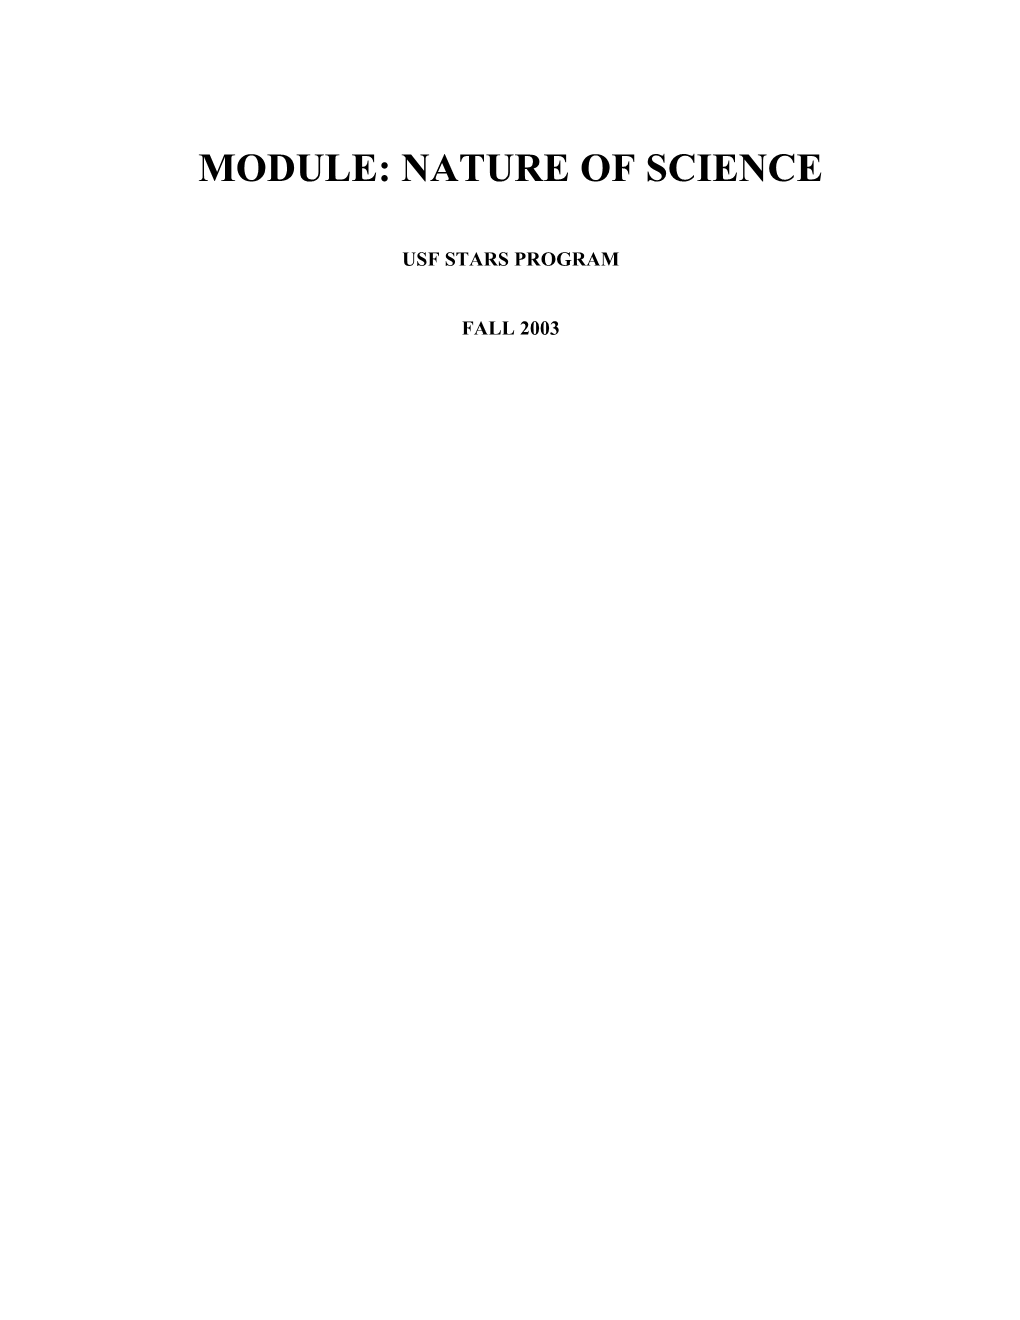 Module: Nature of Science